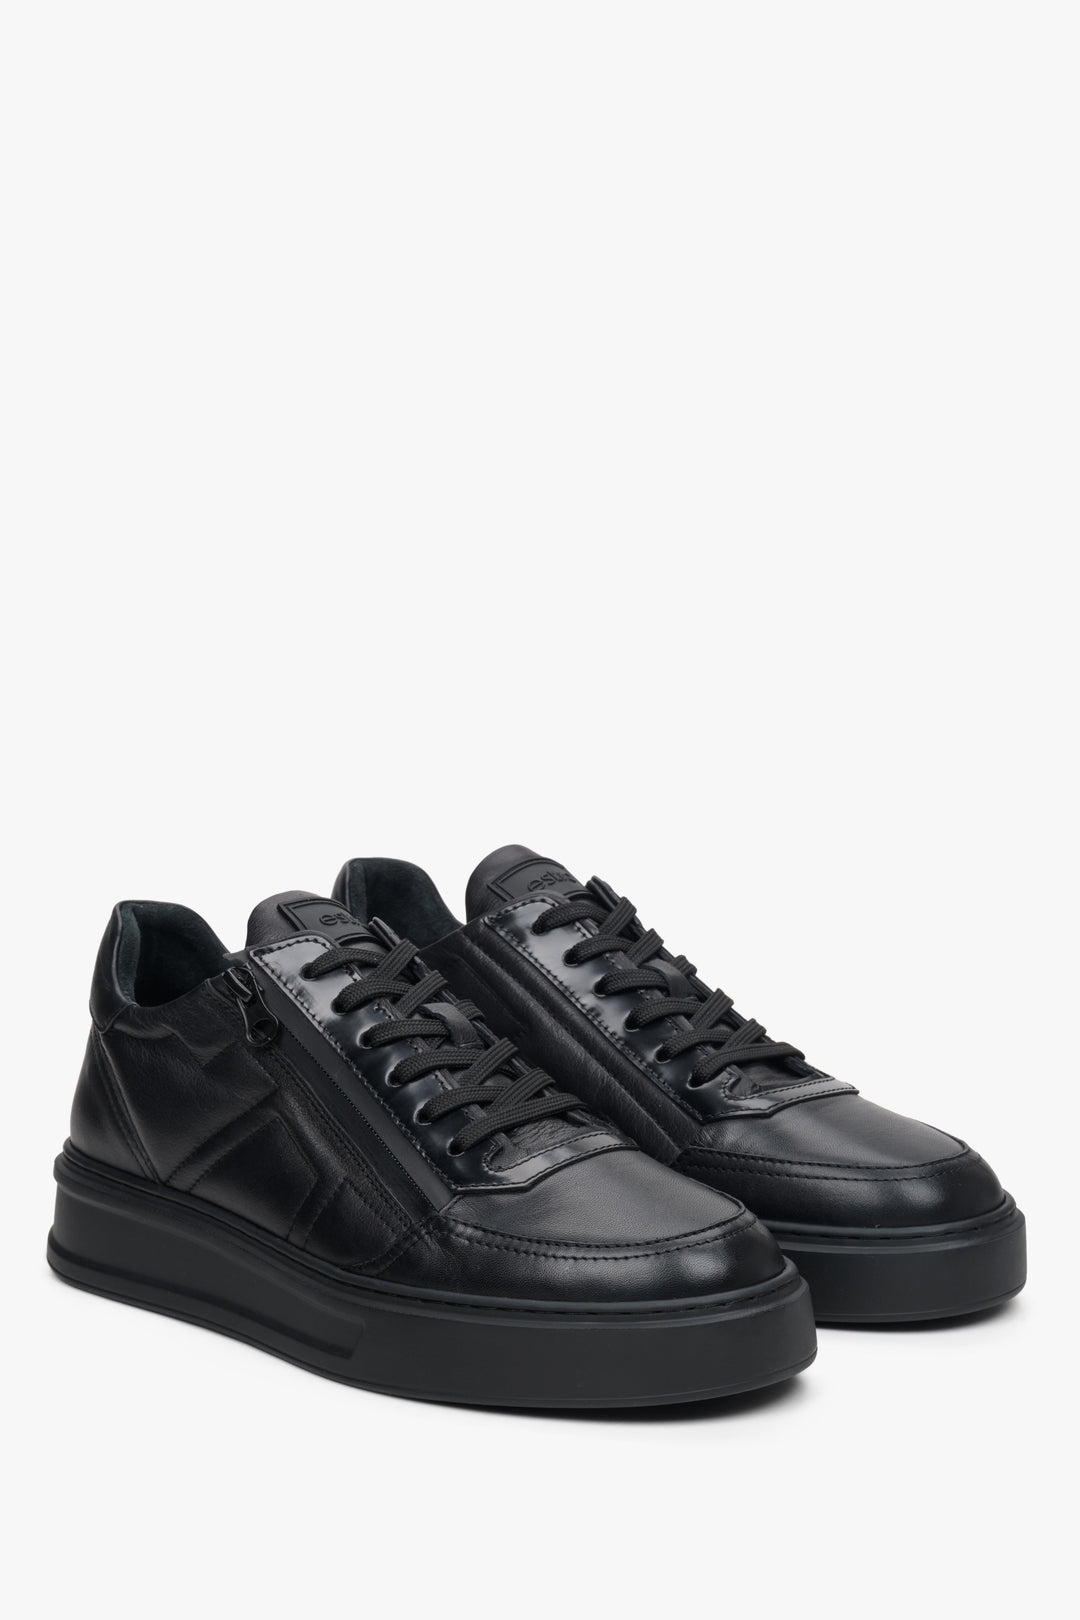 Men's black leather sneakers with decorative zipper by Estro - close-up on the toe cap.